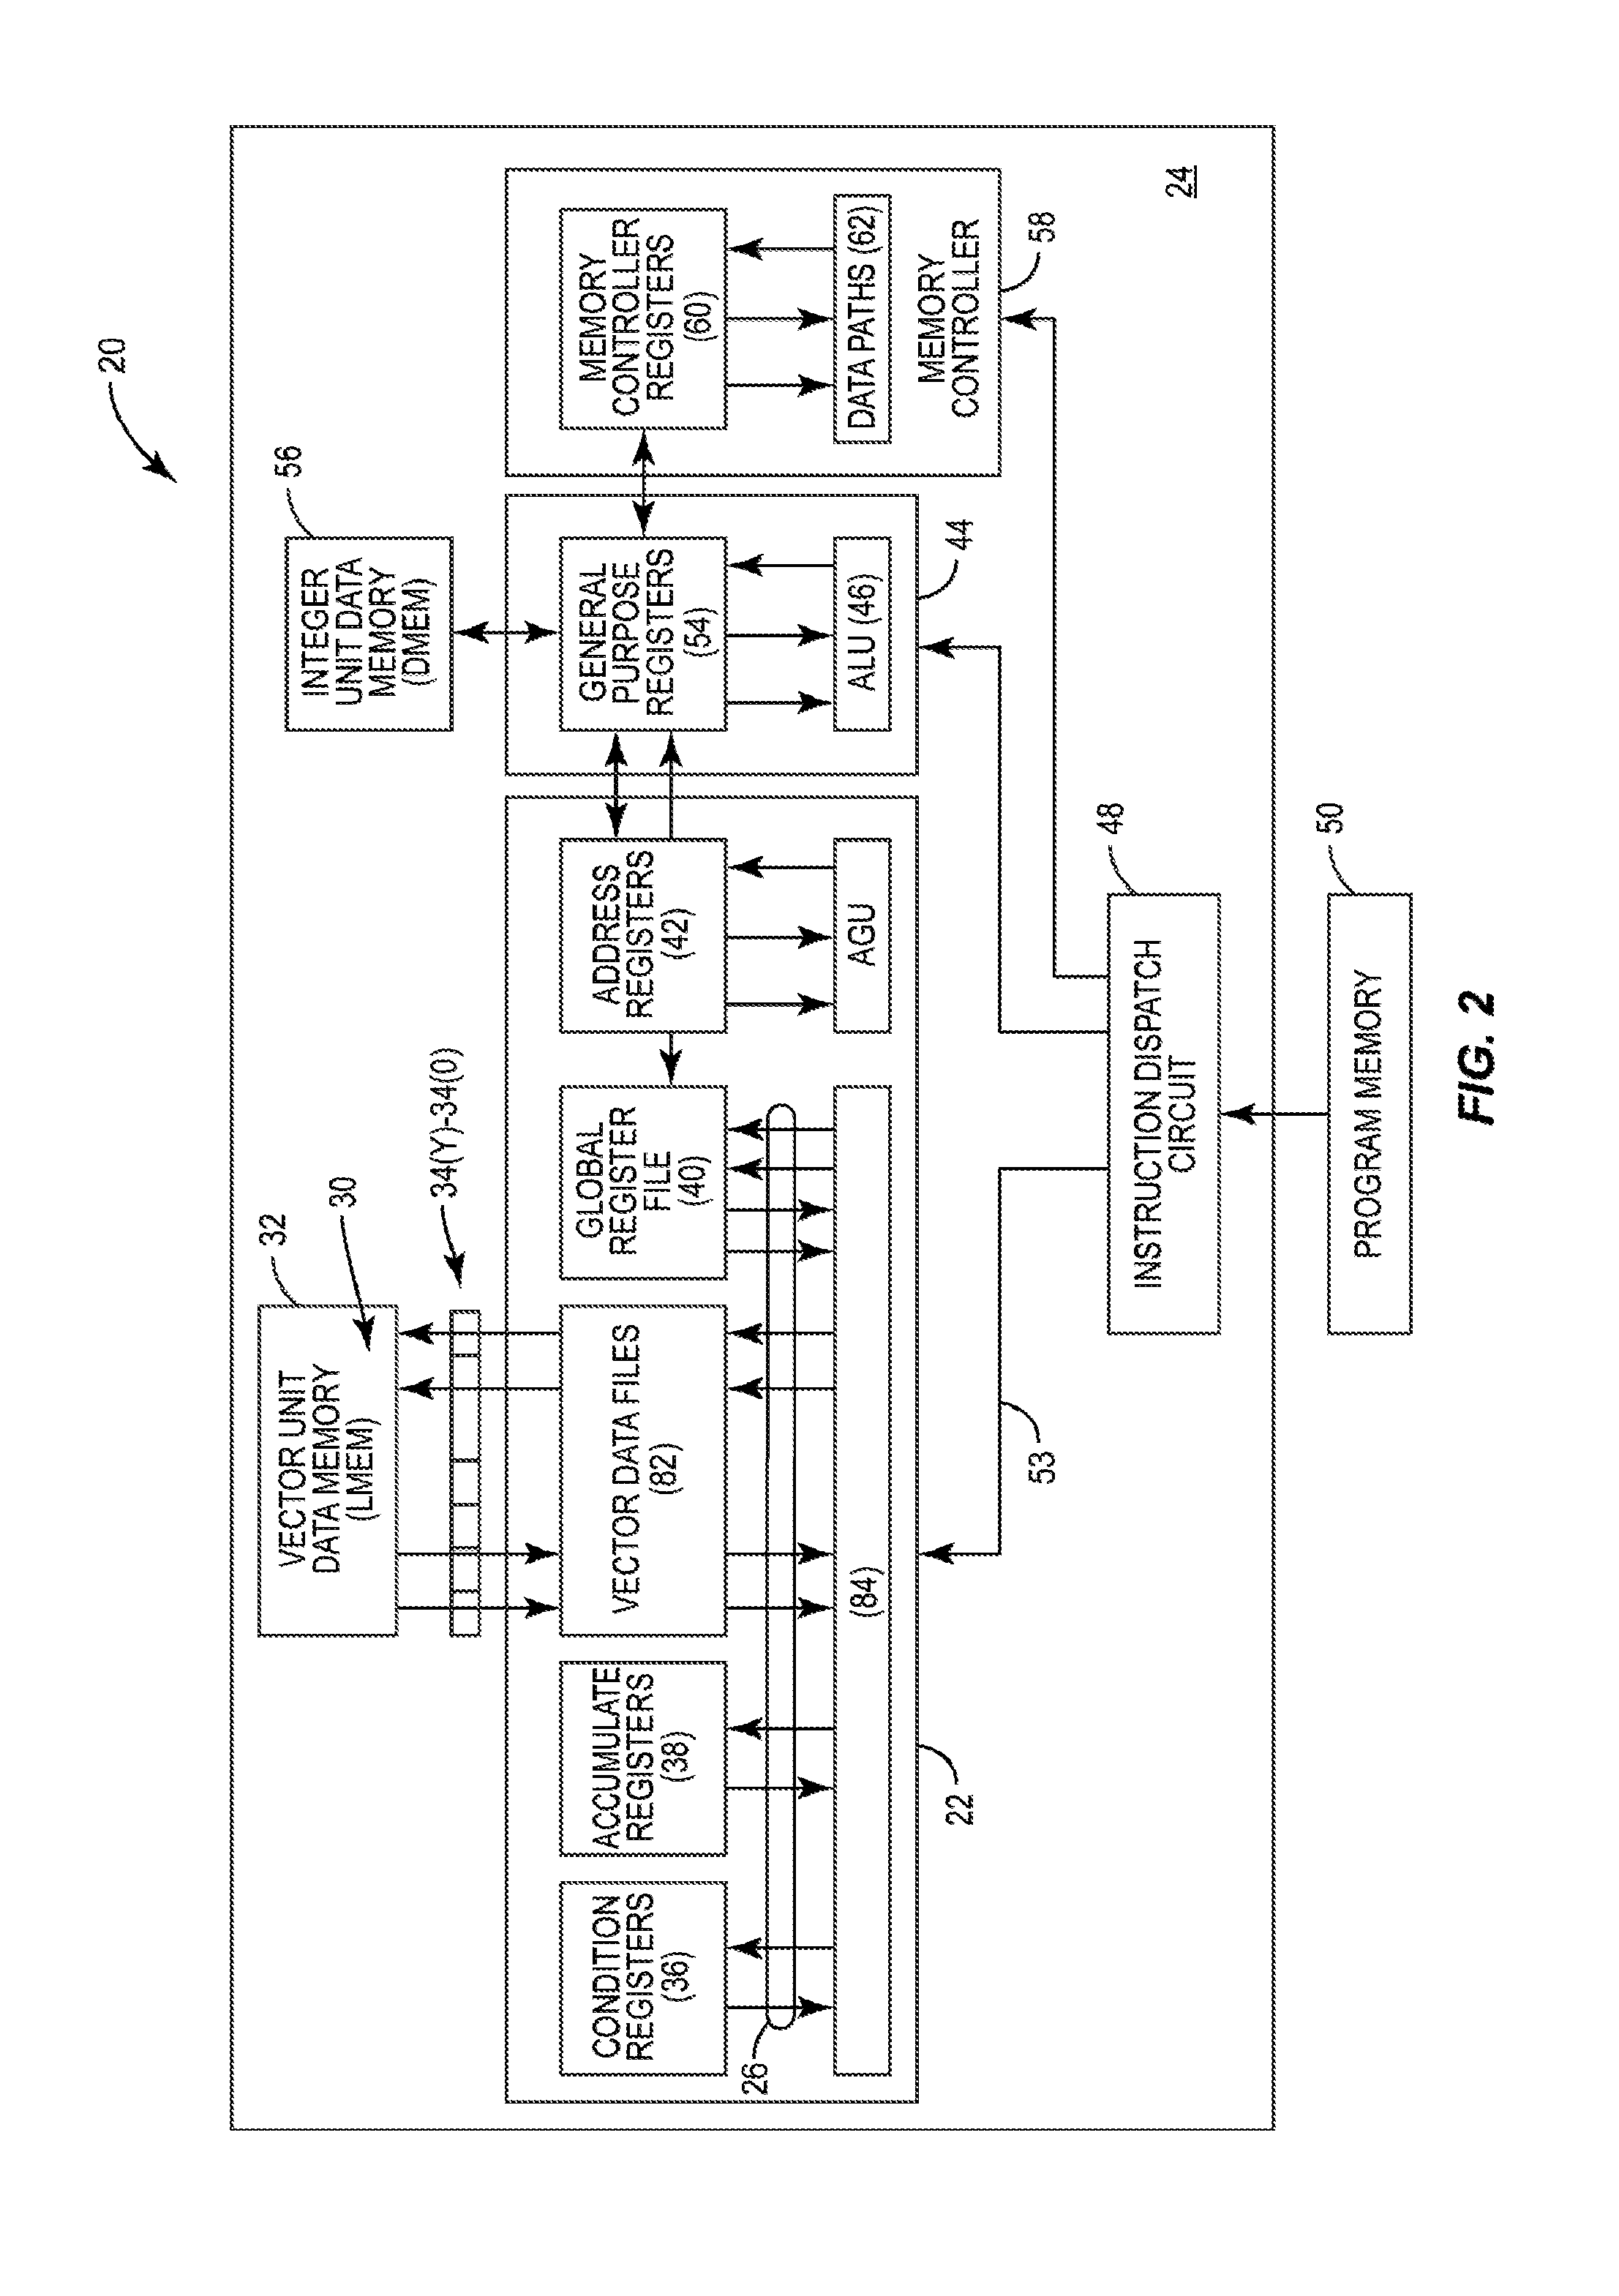 VECTOR PROCESSING ENGINES (VPEs) EMPLOYING REORDERING CIRCUITRY IN DATA FLOW PATHS BETWEEN EXECUTION UNITS AND VECTOR DATA MEMORY TO PROVIDE IN-FLIGHT REORDERING OF OUTPUT VECTOR DATA STORED TO VECTOR DATA MEMORY, AND RELATED VECTOR PROCESSOR SYSTEMS AND METHODS